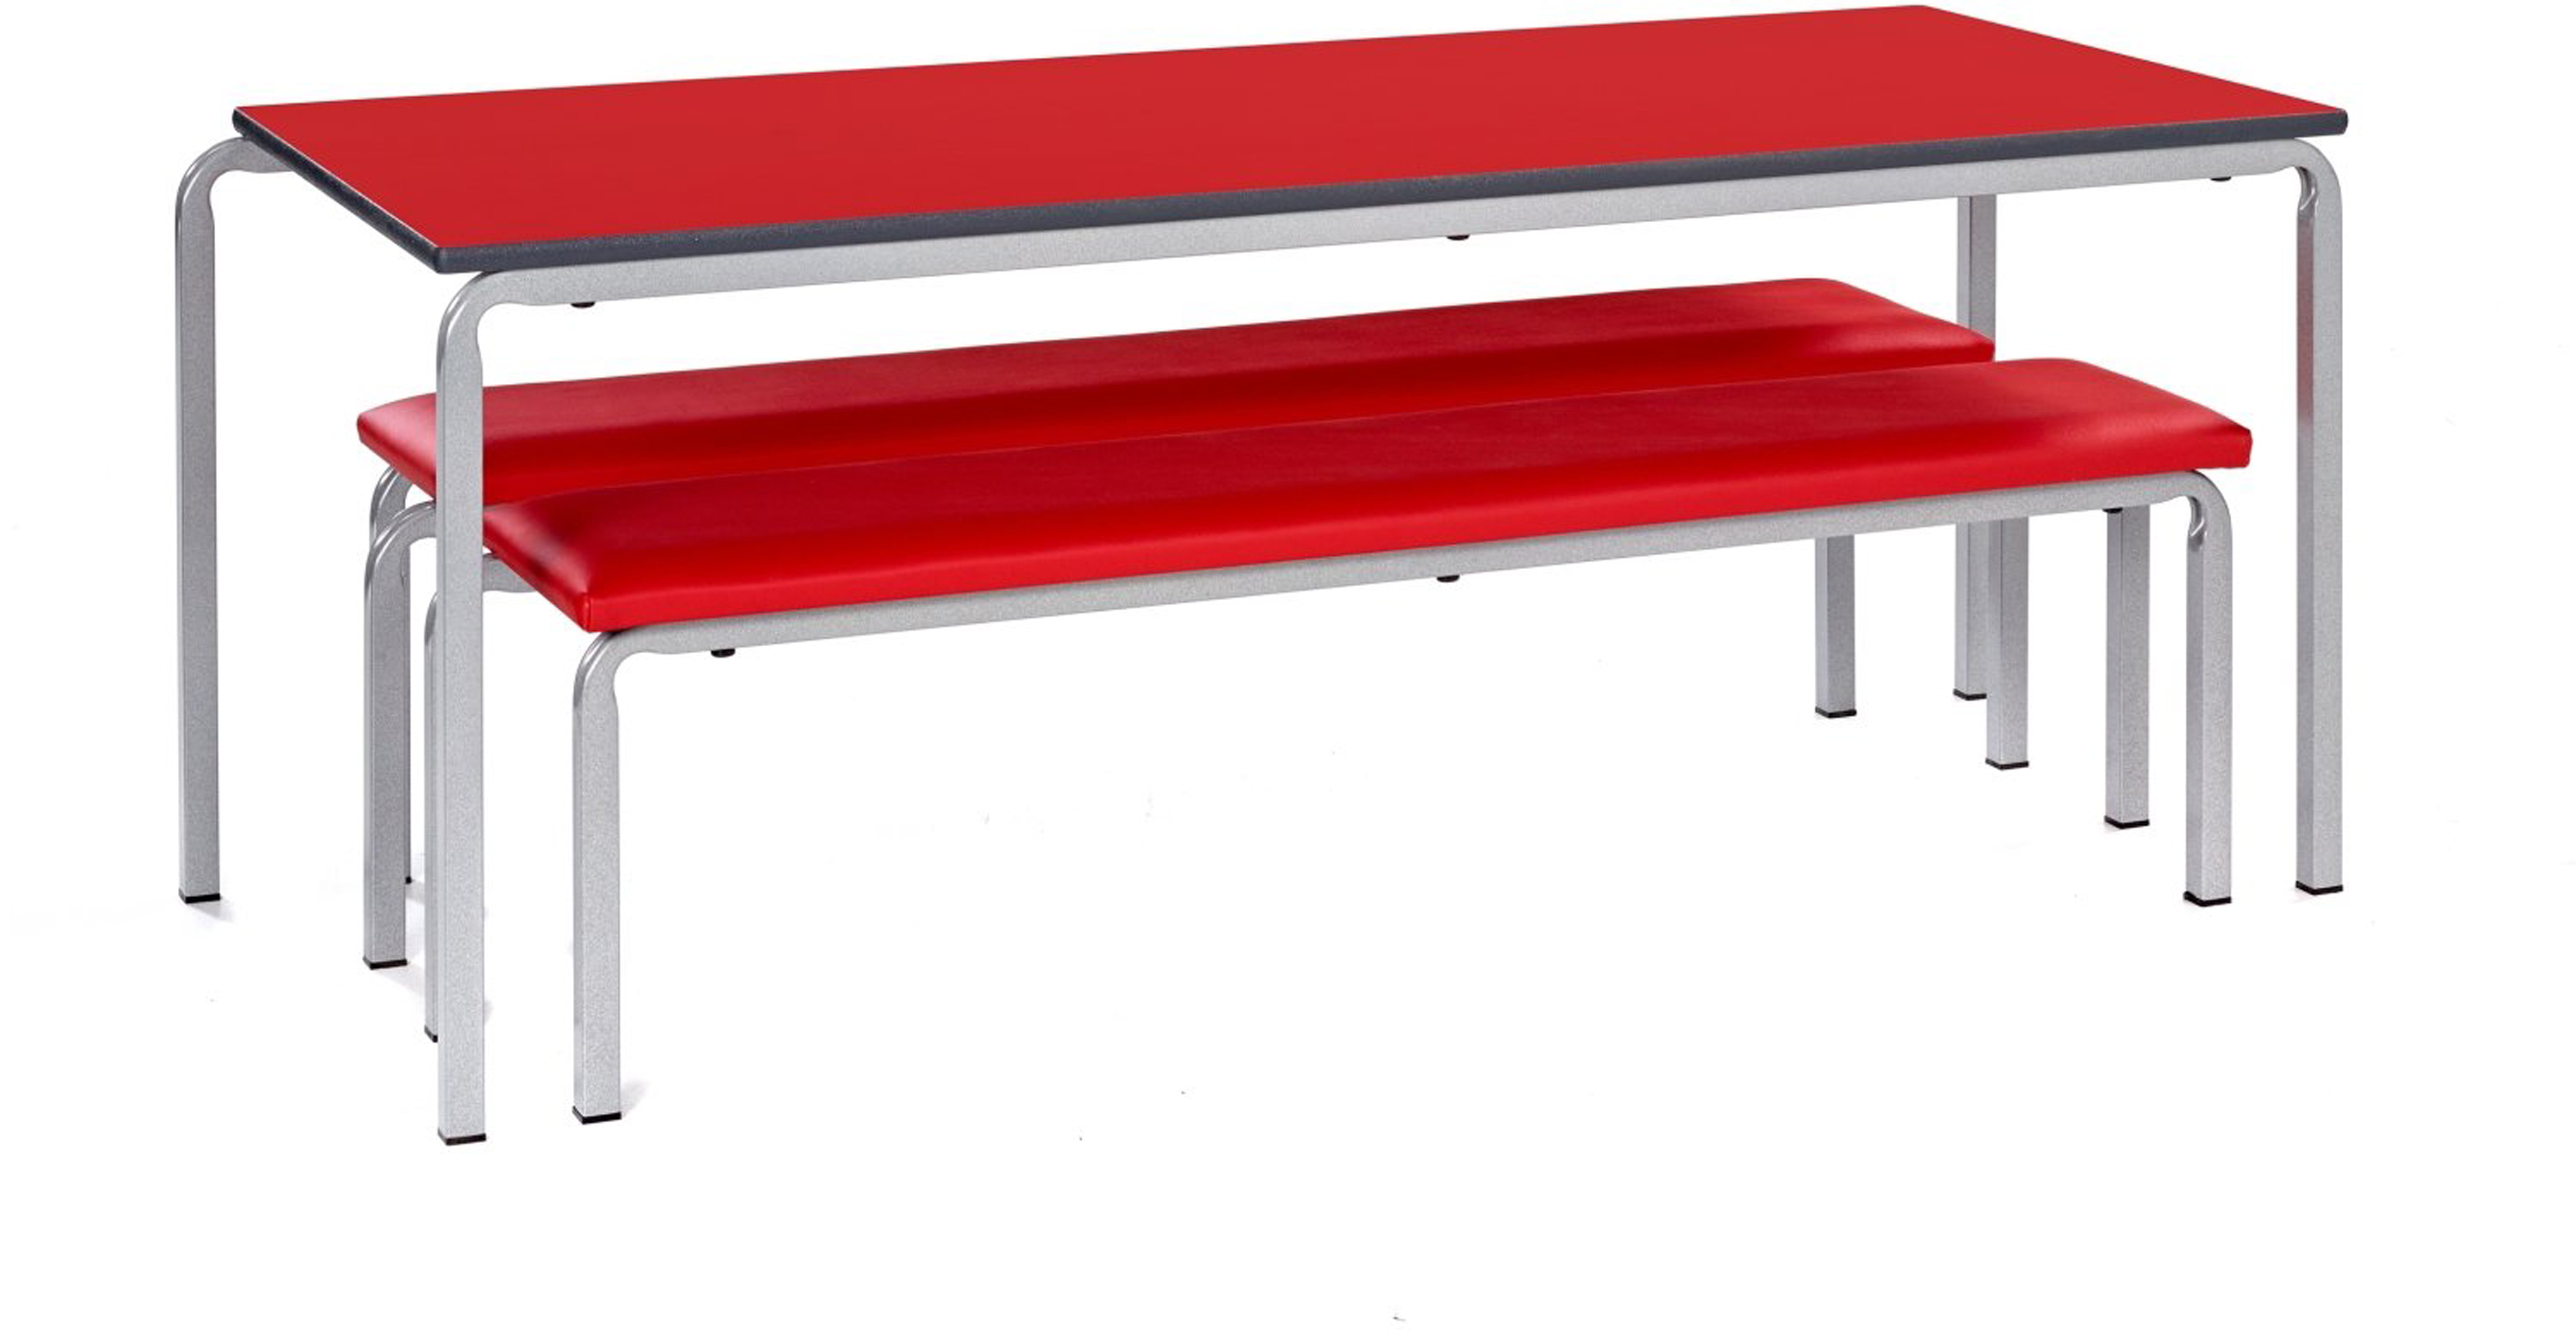 Gala Junior Tables and Benches - Red